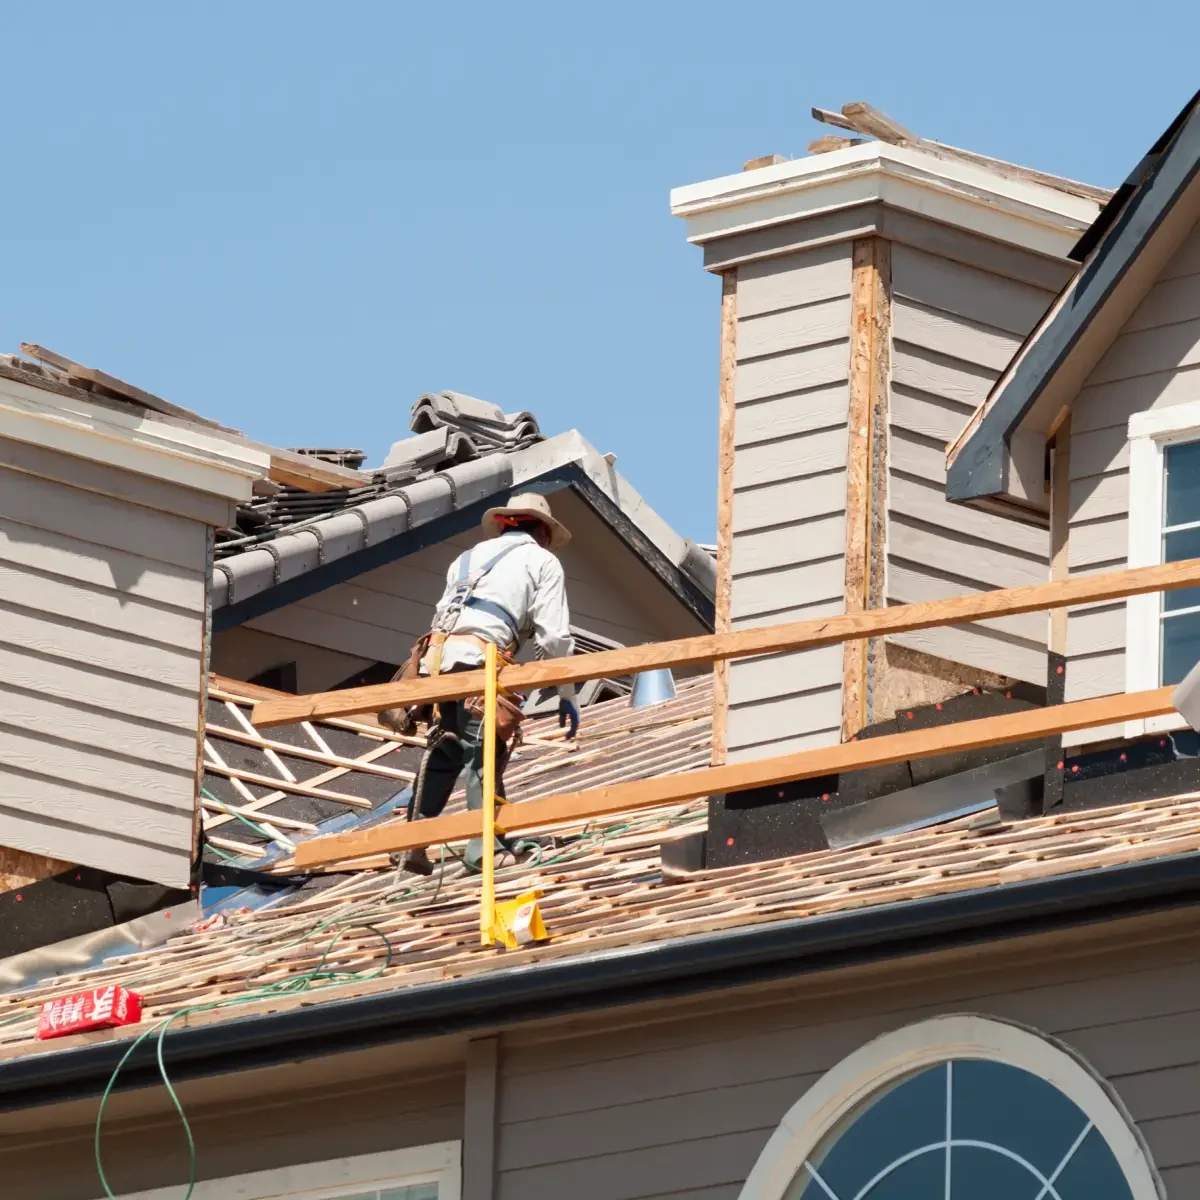 bountiful-utah-residential-roofing-contractor-sq - Copy